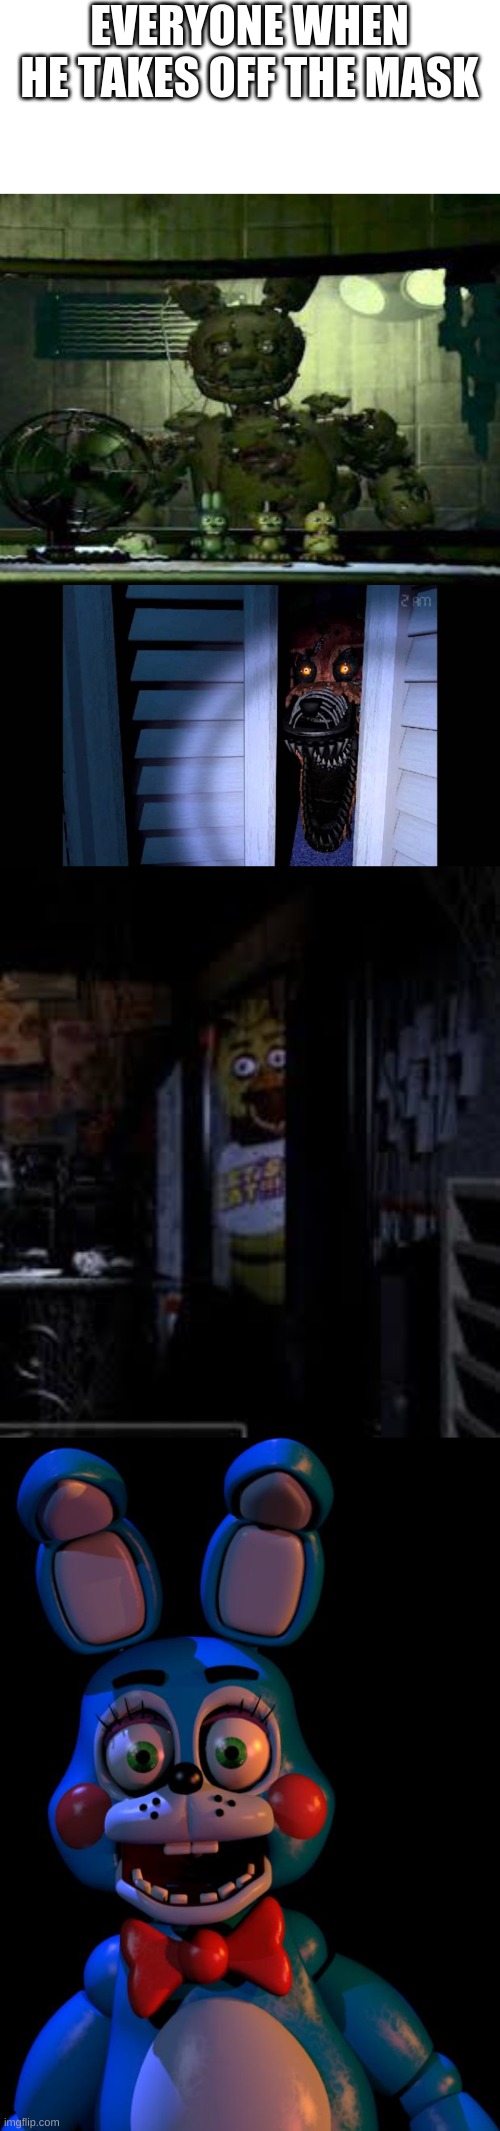 EVERYONE WHEN HE TAKES OFF THE MASK | image tagged in fnaf springtrap in window,foxy fnaf 4,chica looking in window fnaf,toy bonnie fnaf | made w/ Imgflip meme maker